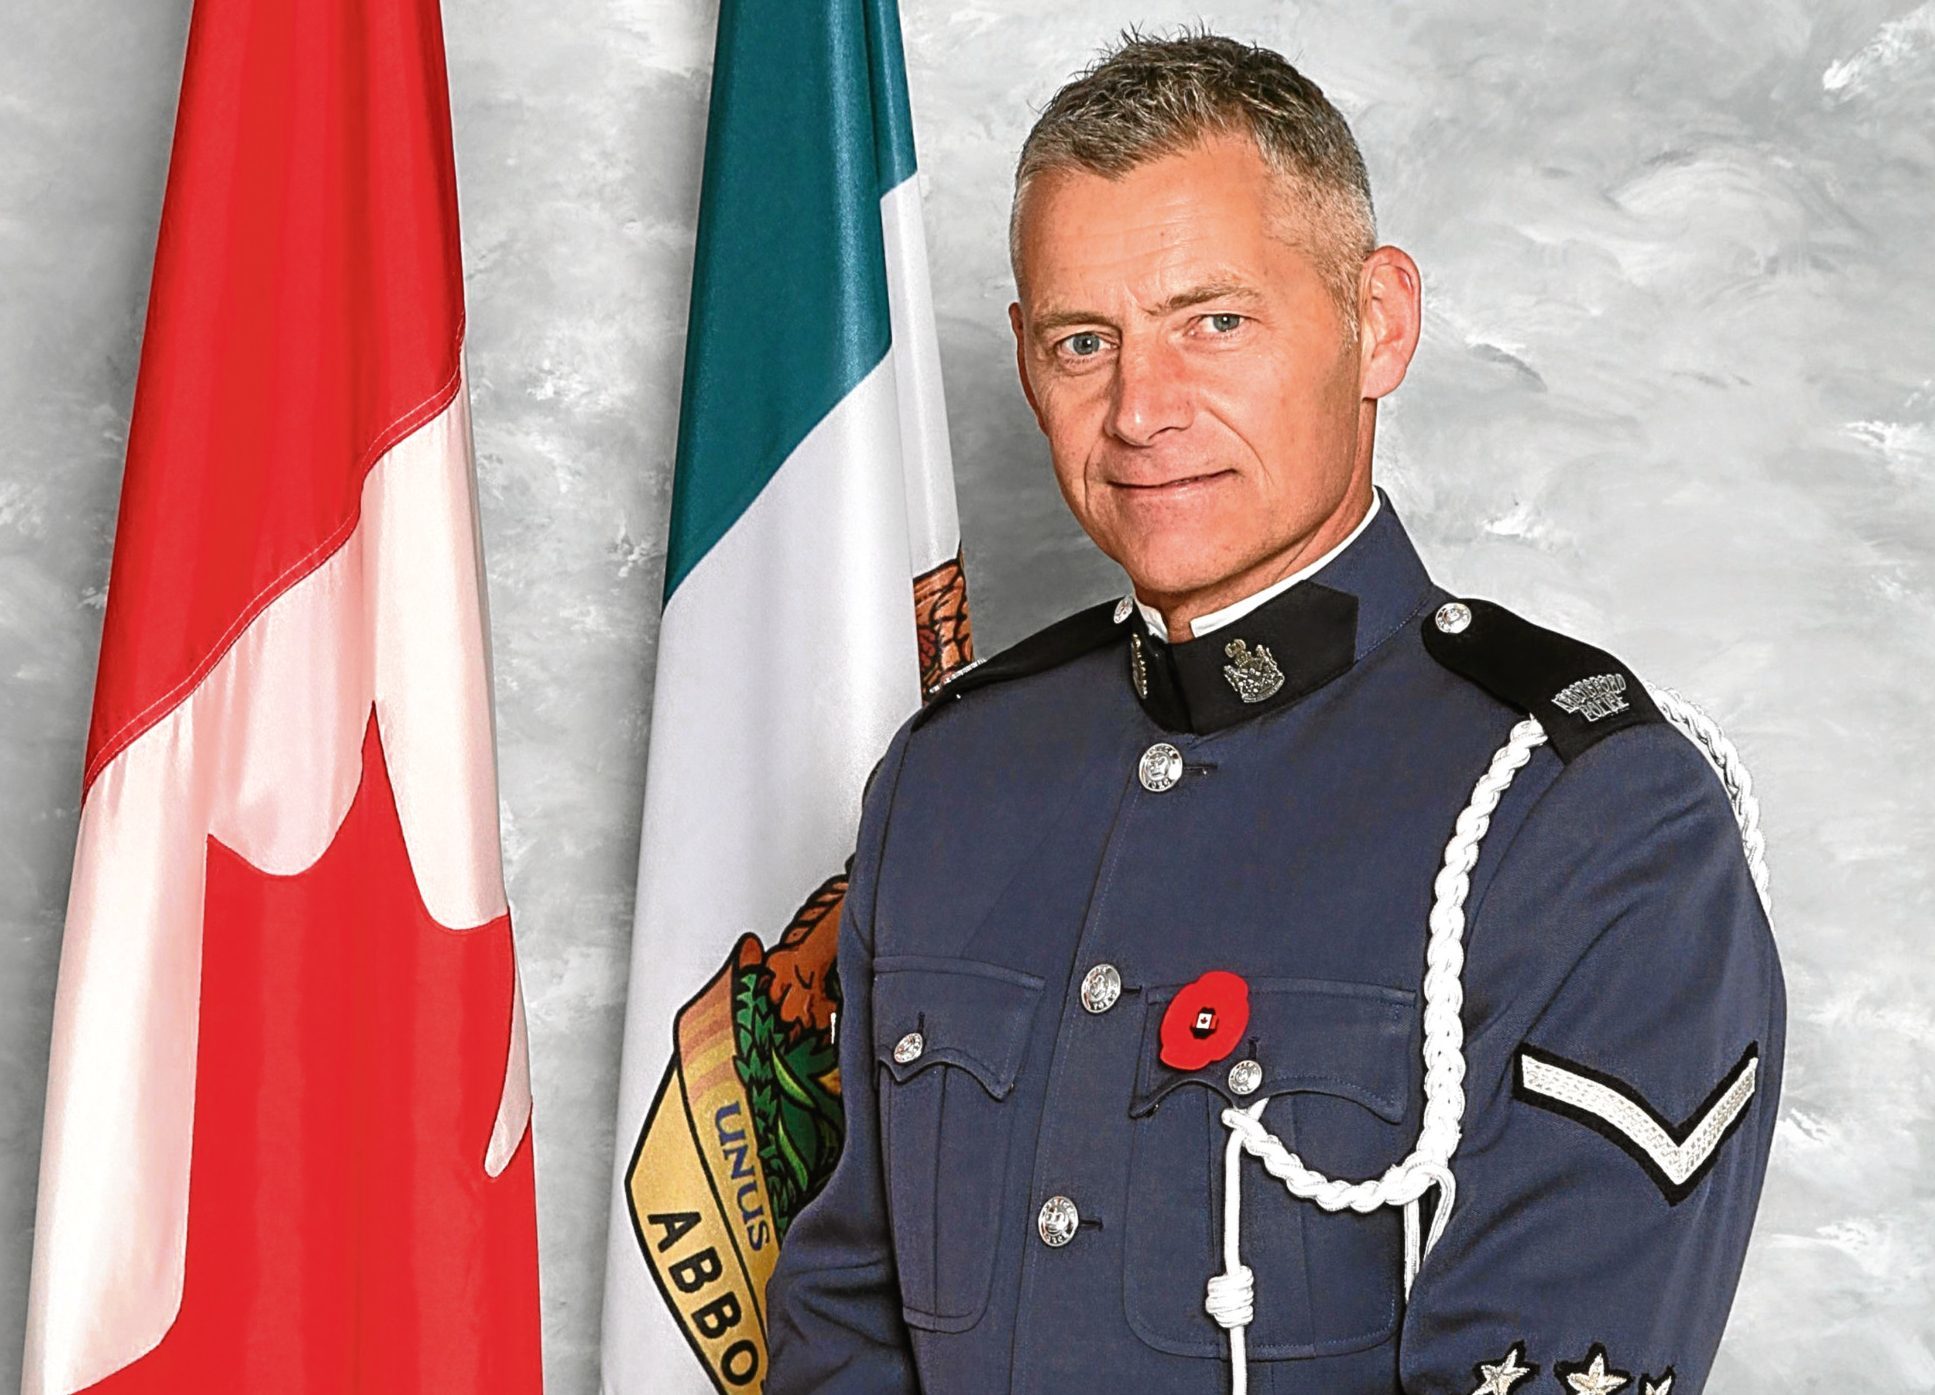 PC John Davidson, 53, a former British police officer who was shot dead while serving in Canada. (Abbotsford Police Department/PA Wire)